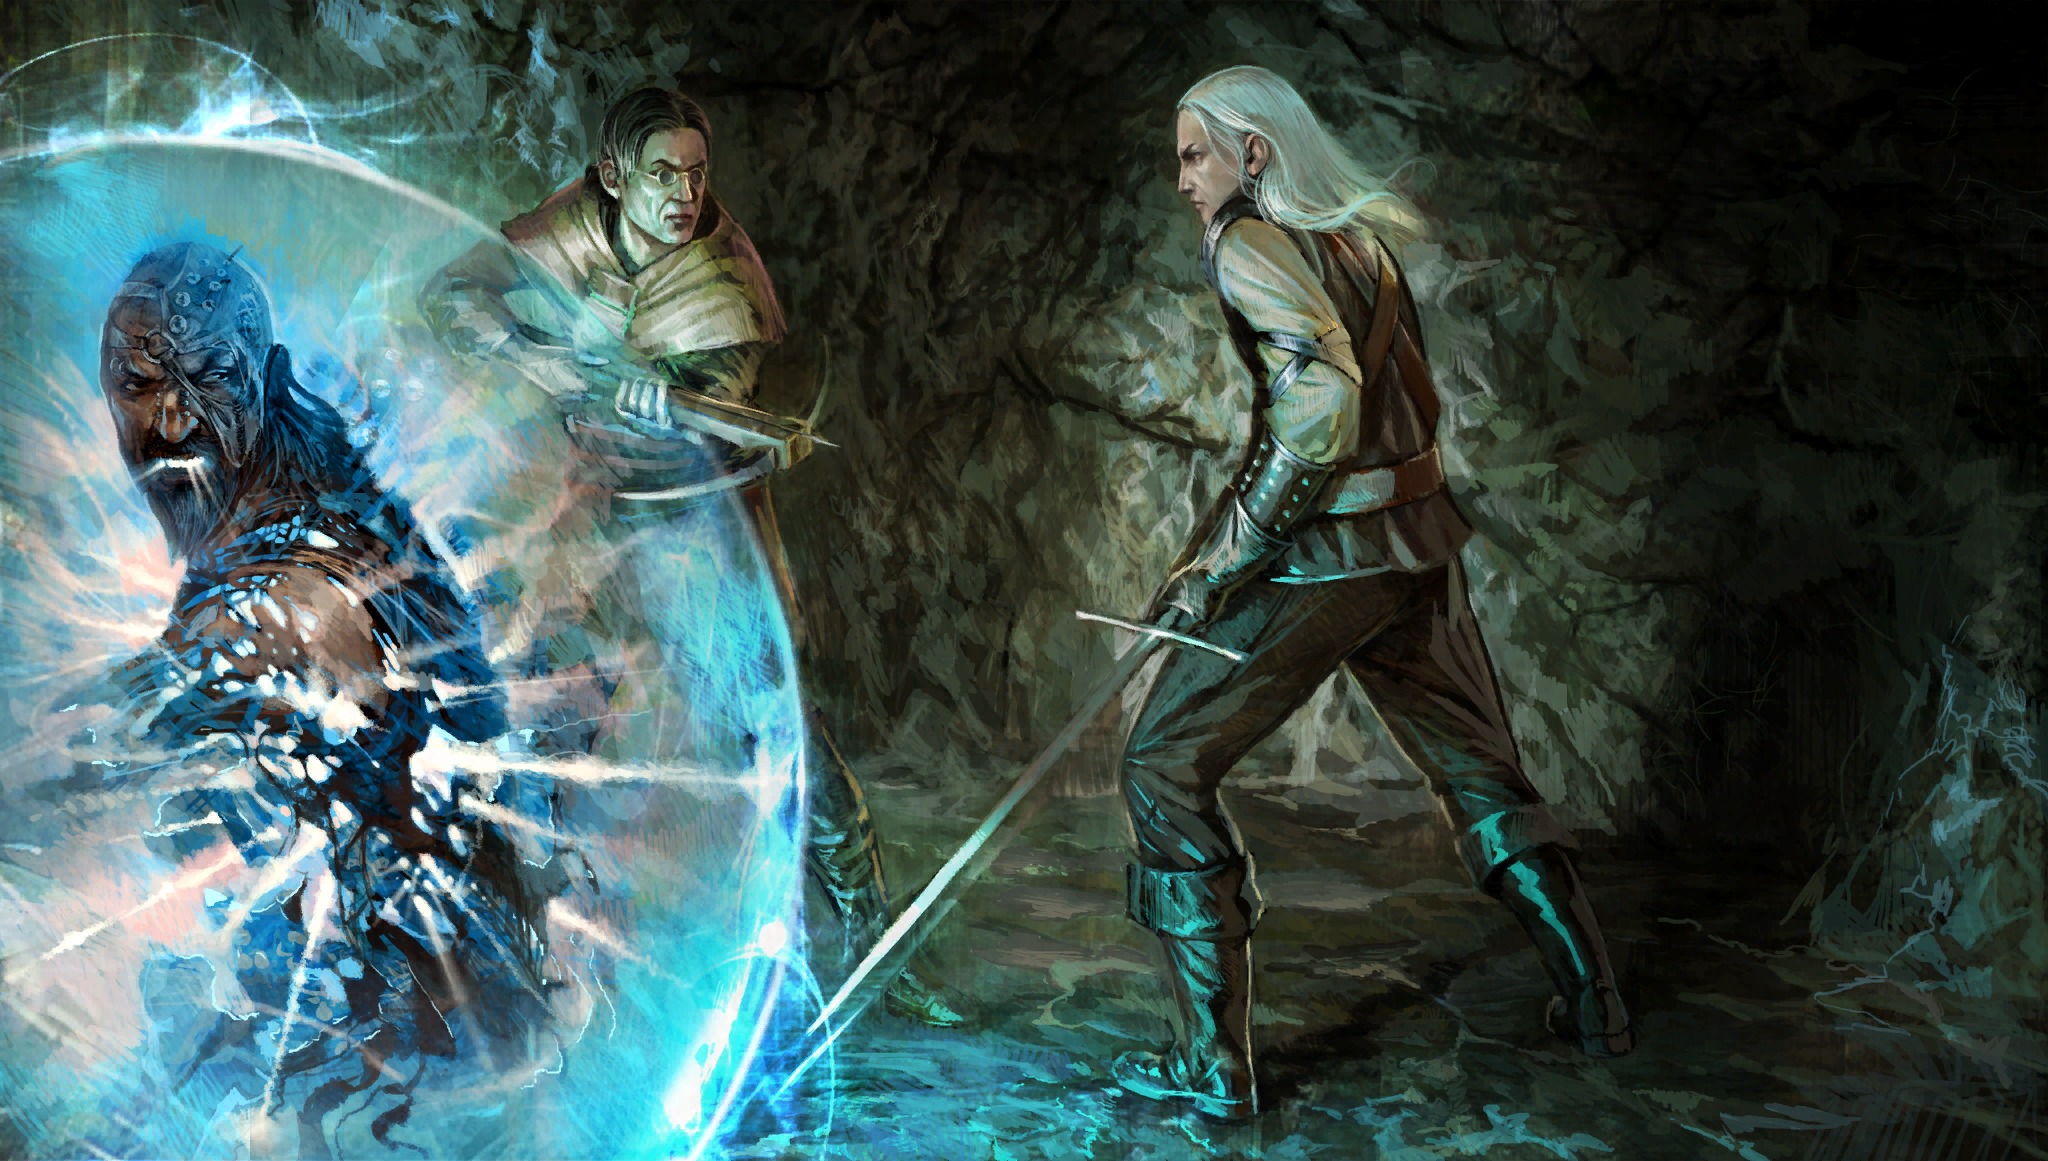 Cool Wallpapers men, fantasy, art, witcher, cave, witch, sorcerer, crossbow